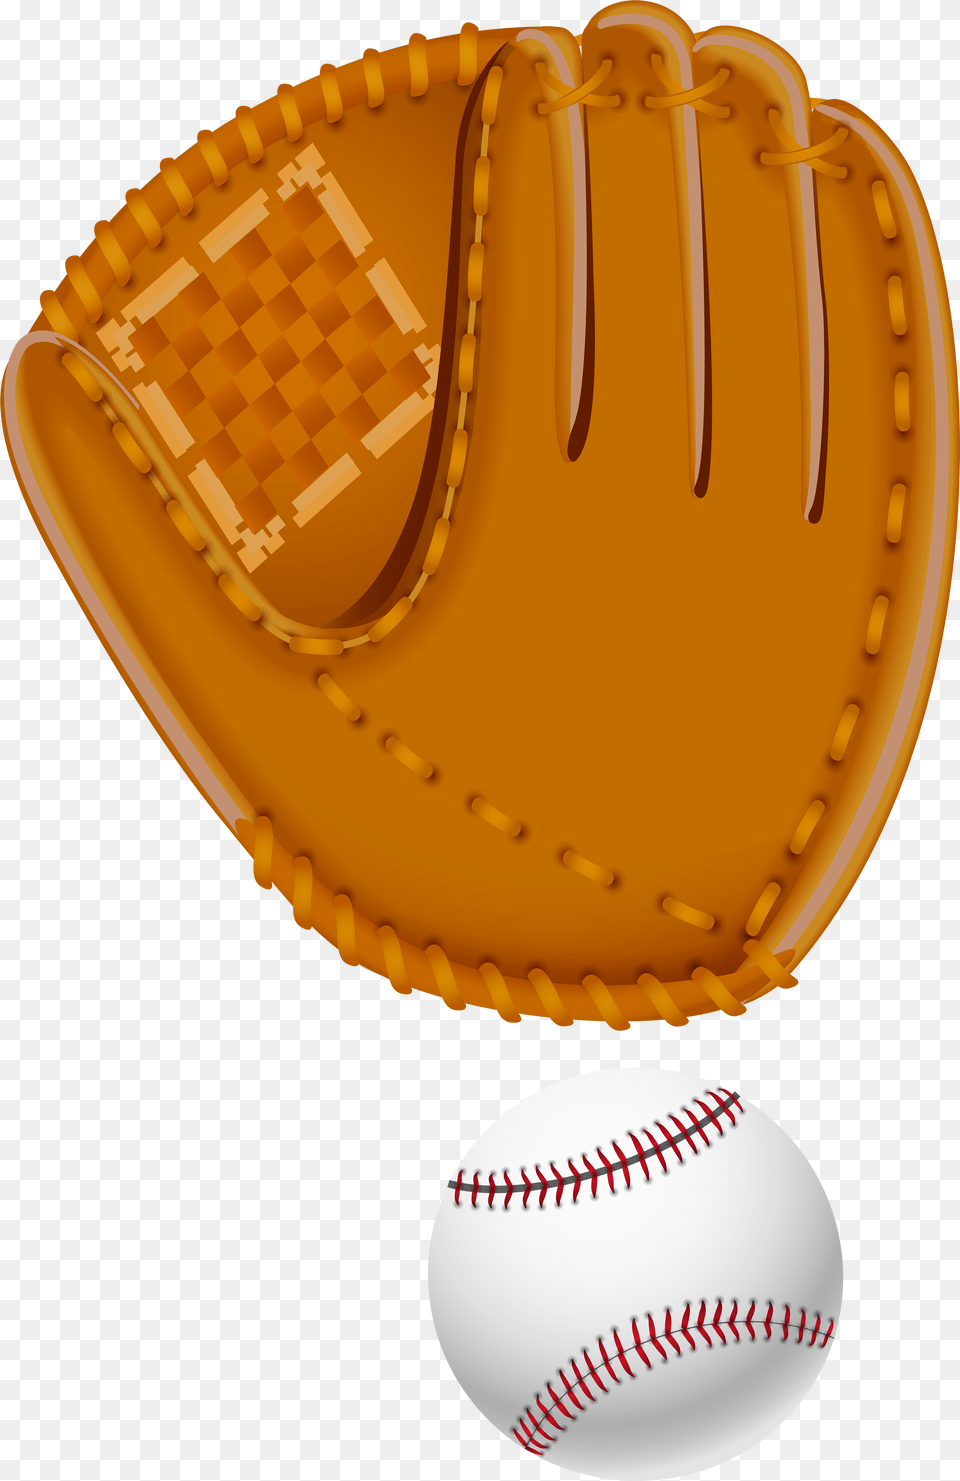 Library Of Baseball Glove Svg Stock Large Baseball Glove Clipart Free Transparent Png